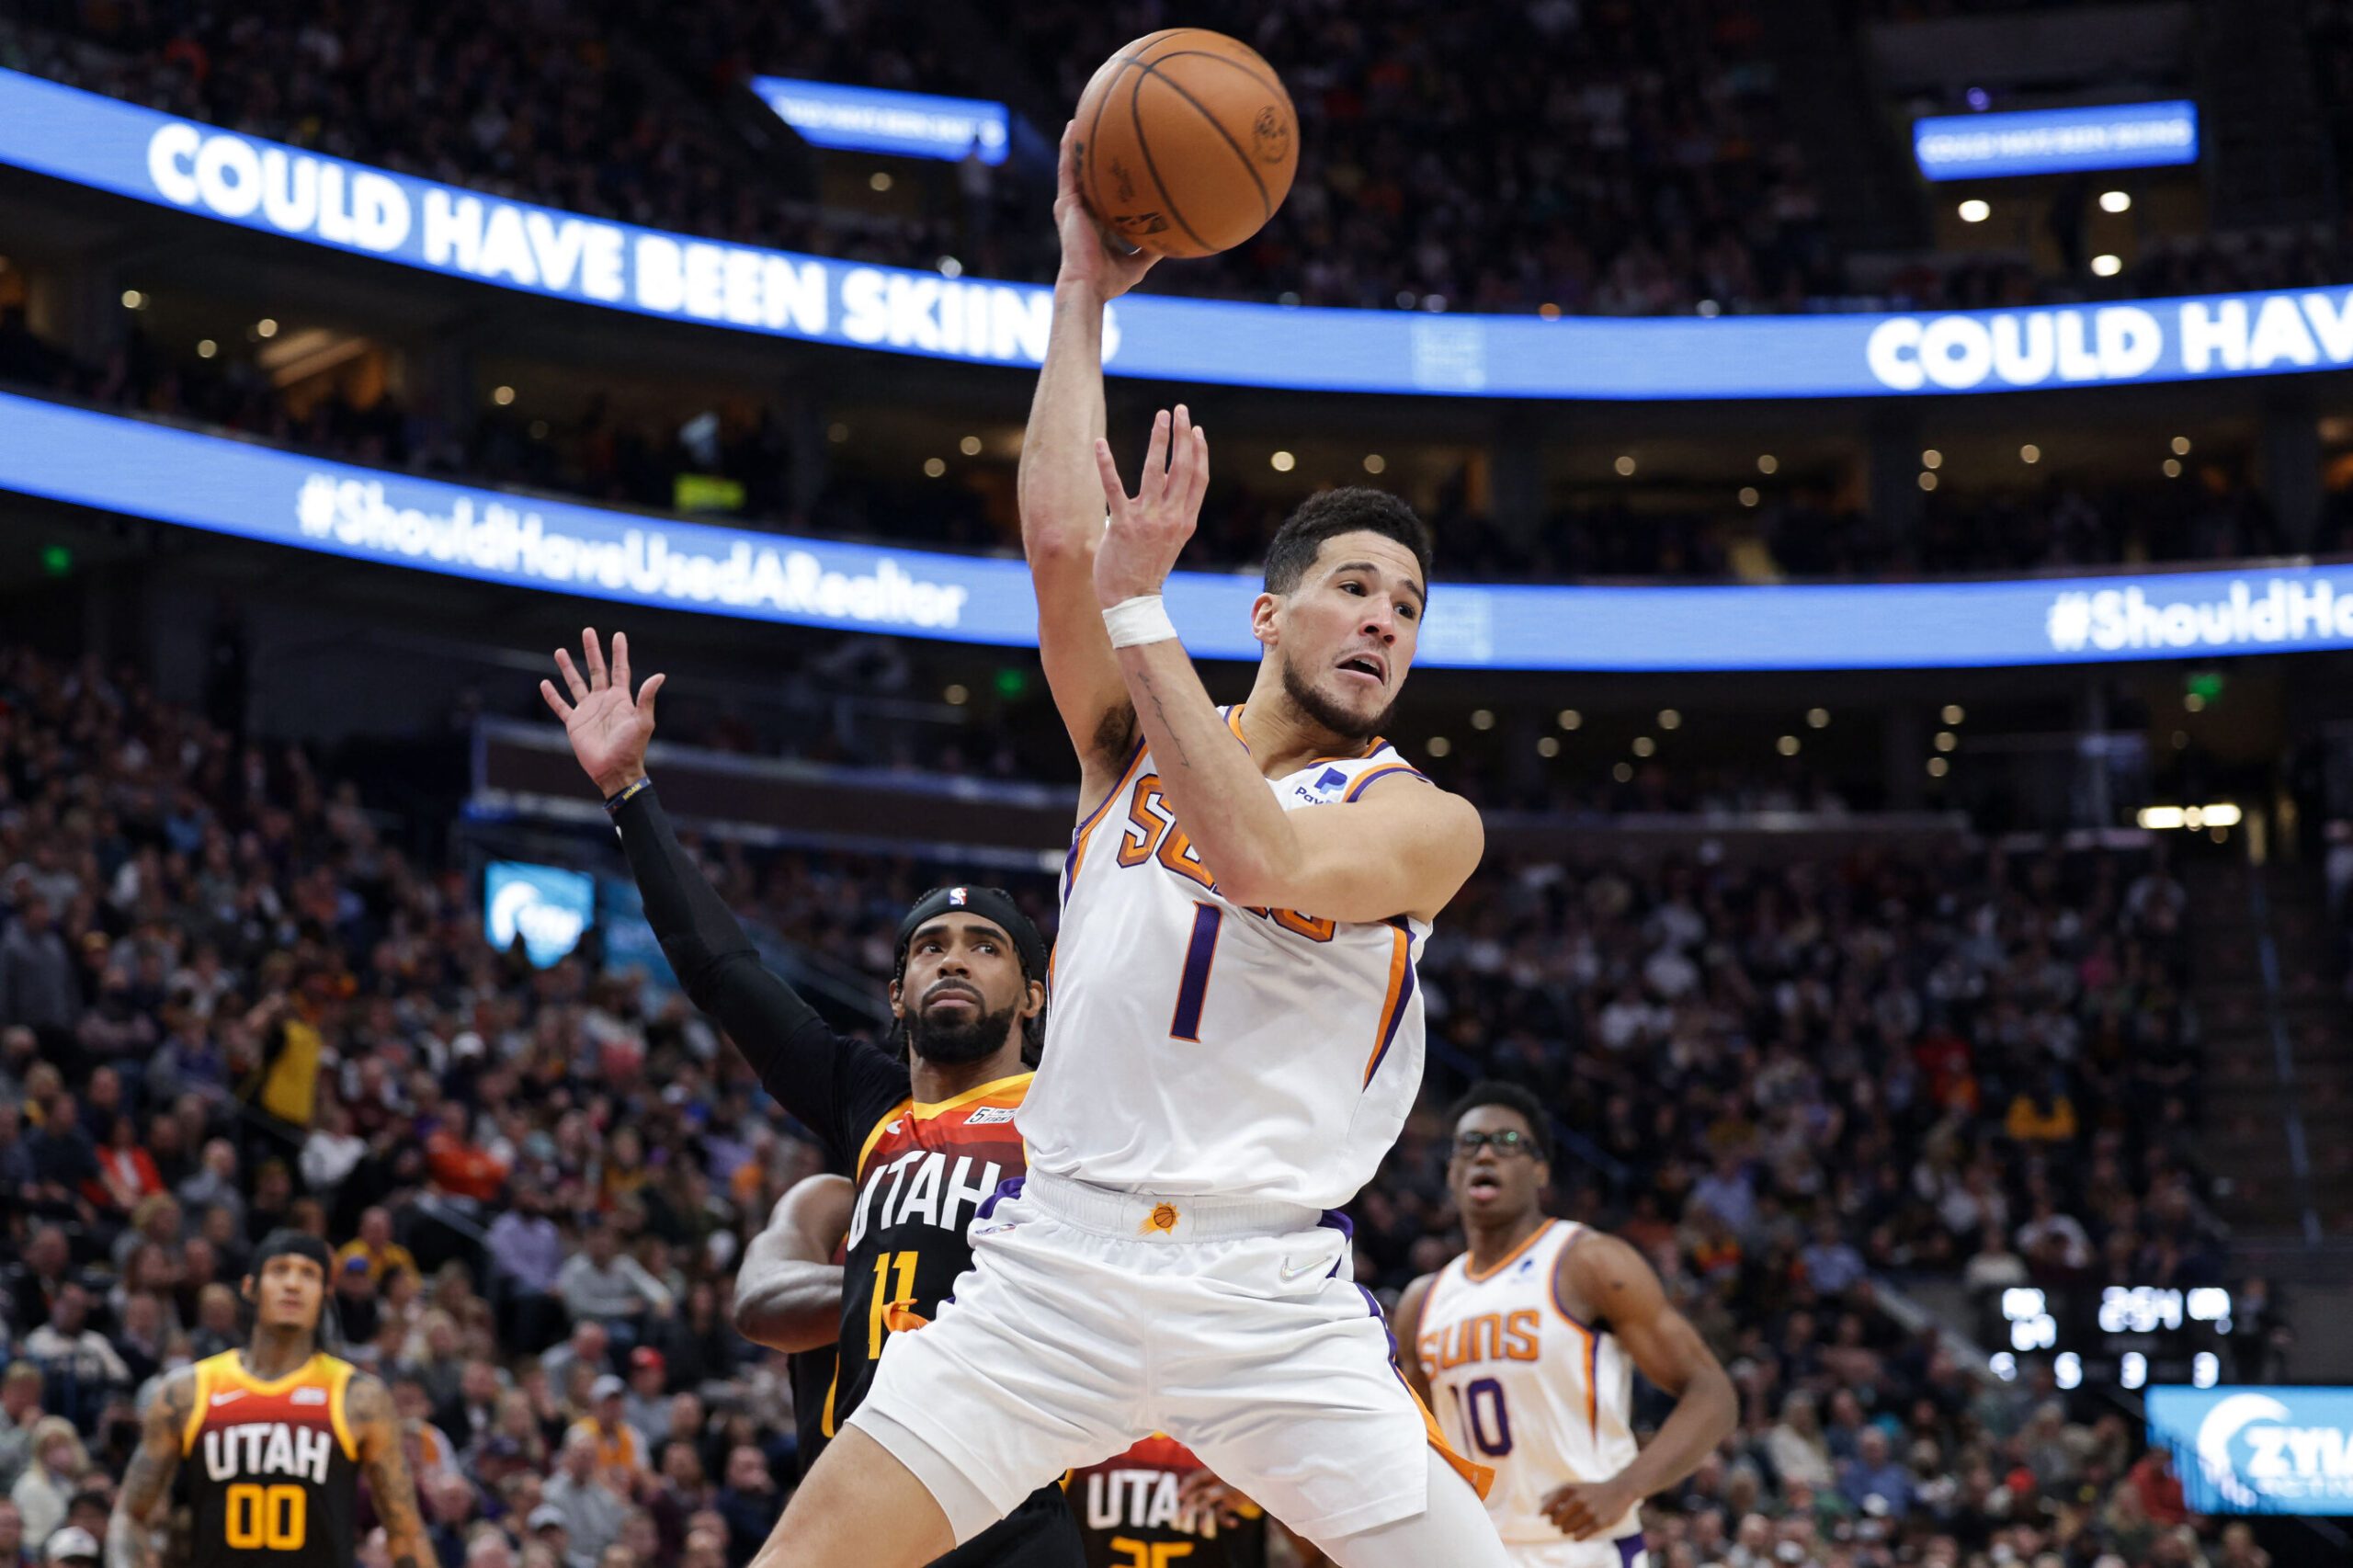 Devin Booker pours in 43 as streaking Suns top Jazz